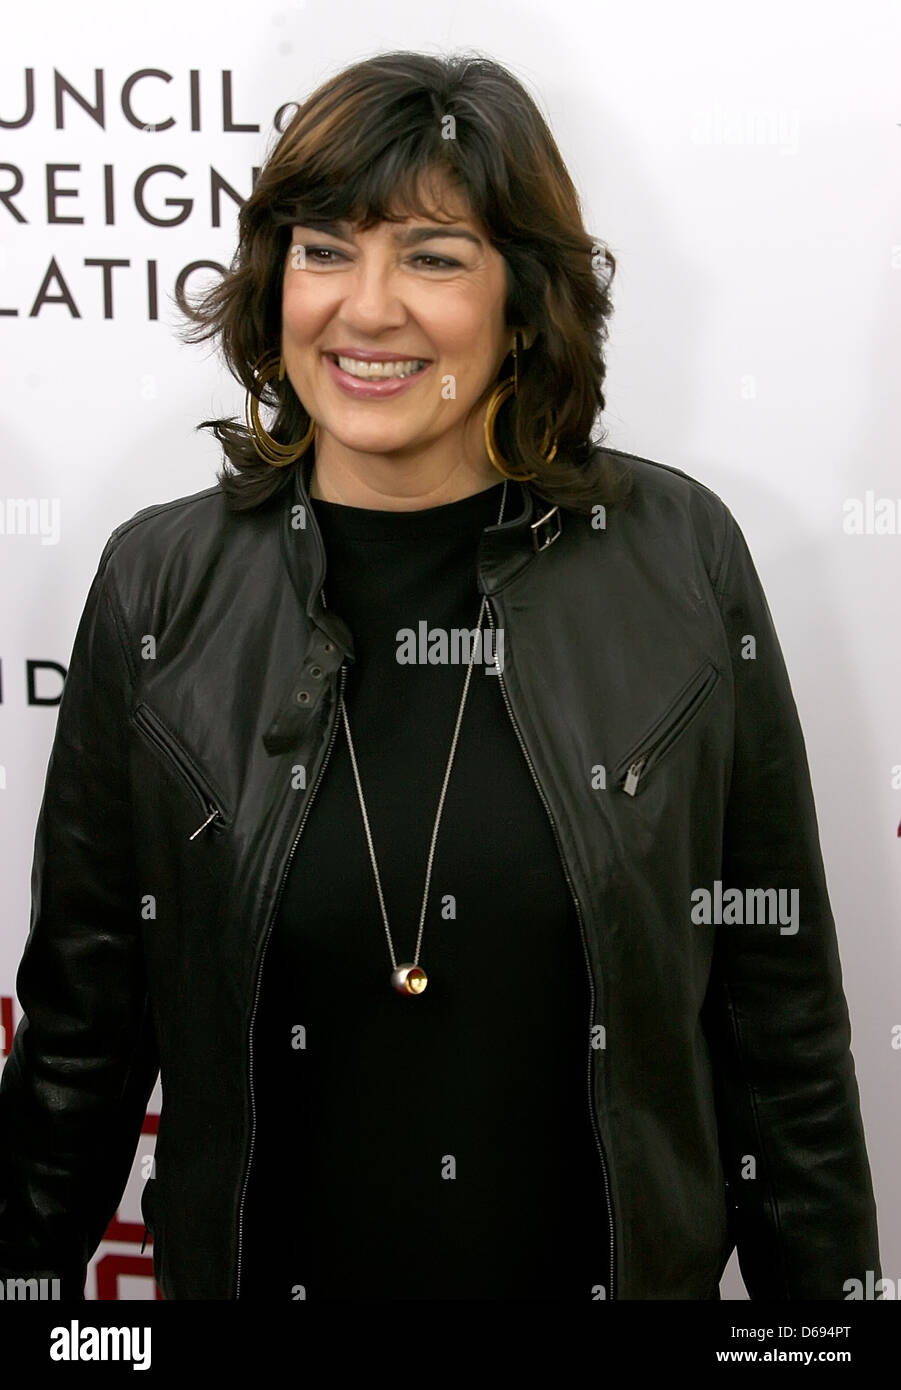 Journalist, Christiane Amanpour Premiere of 'In the Land of Blood and Honey' at the School of Visual Arts - Arrivals New York Stock Photo